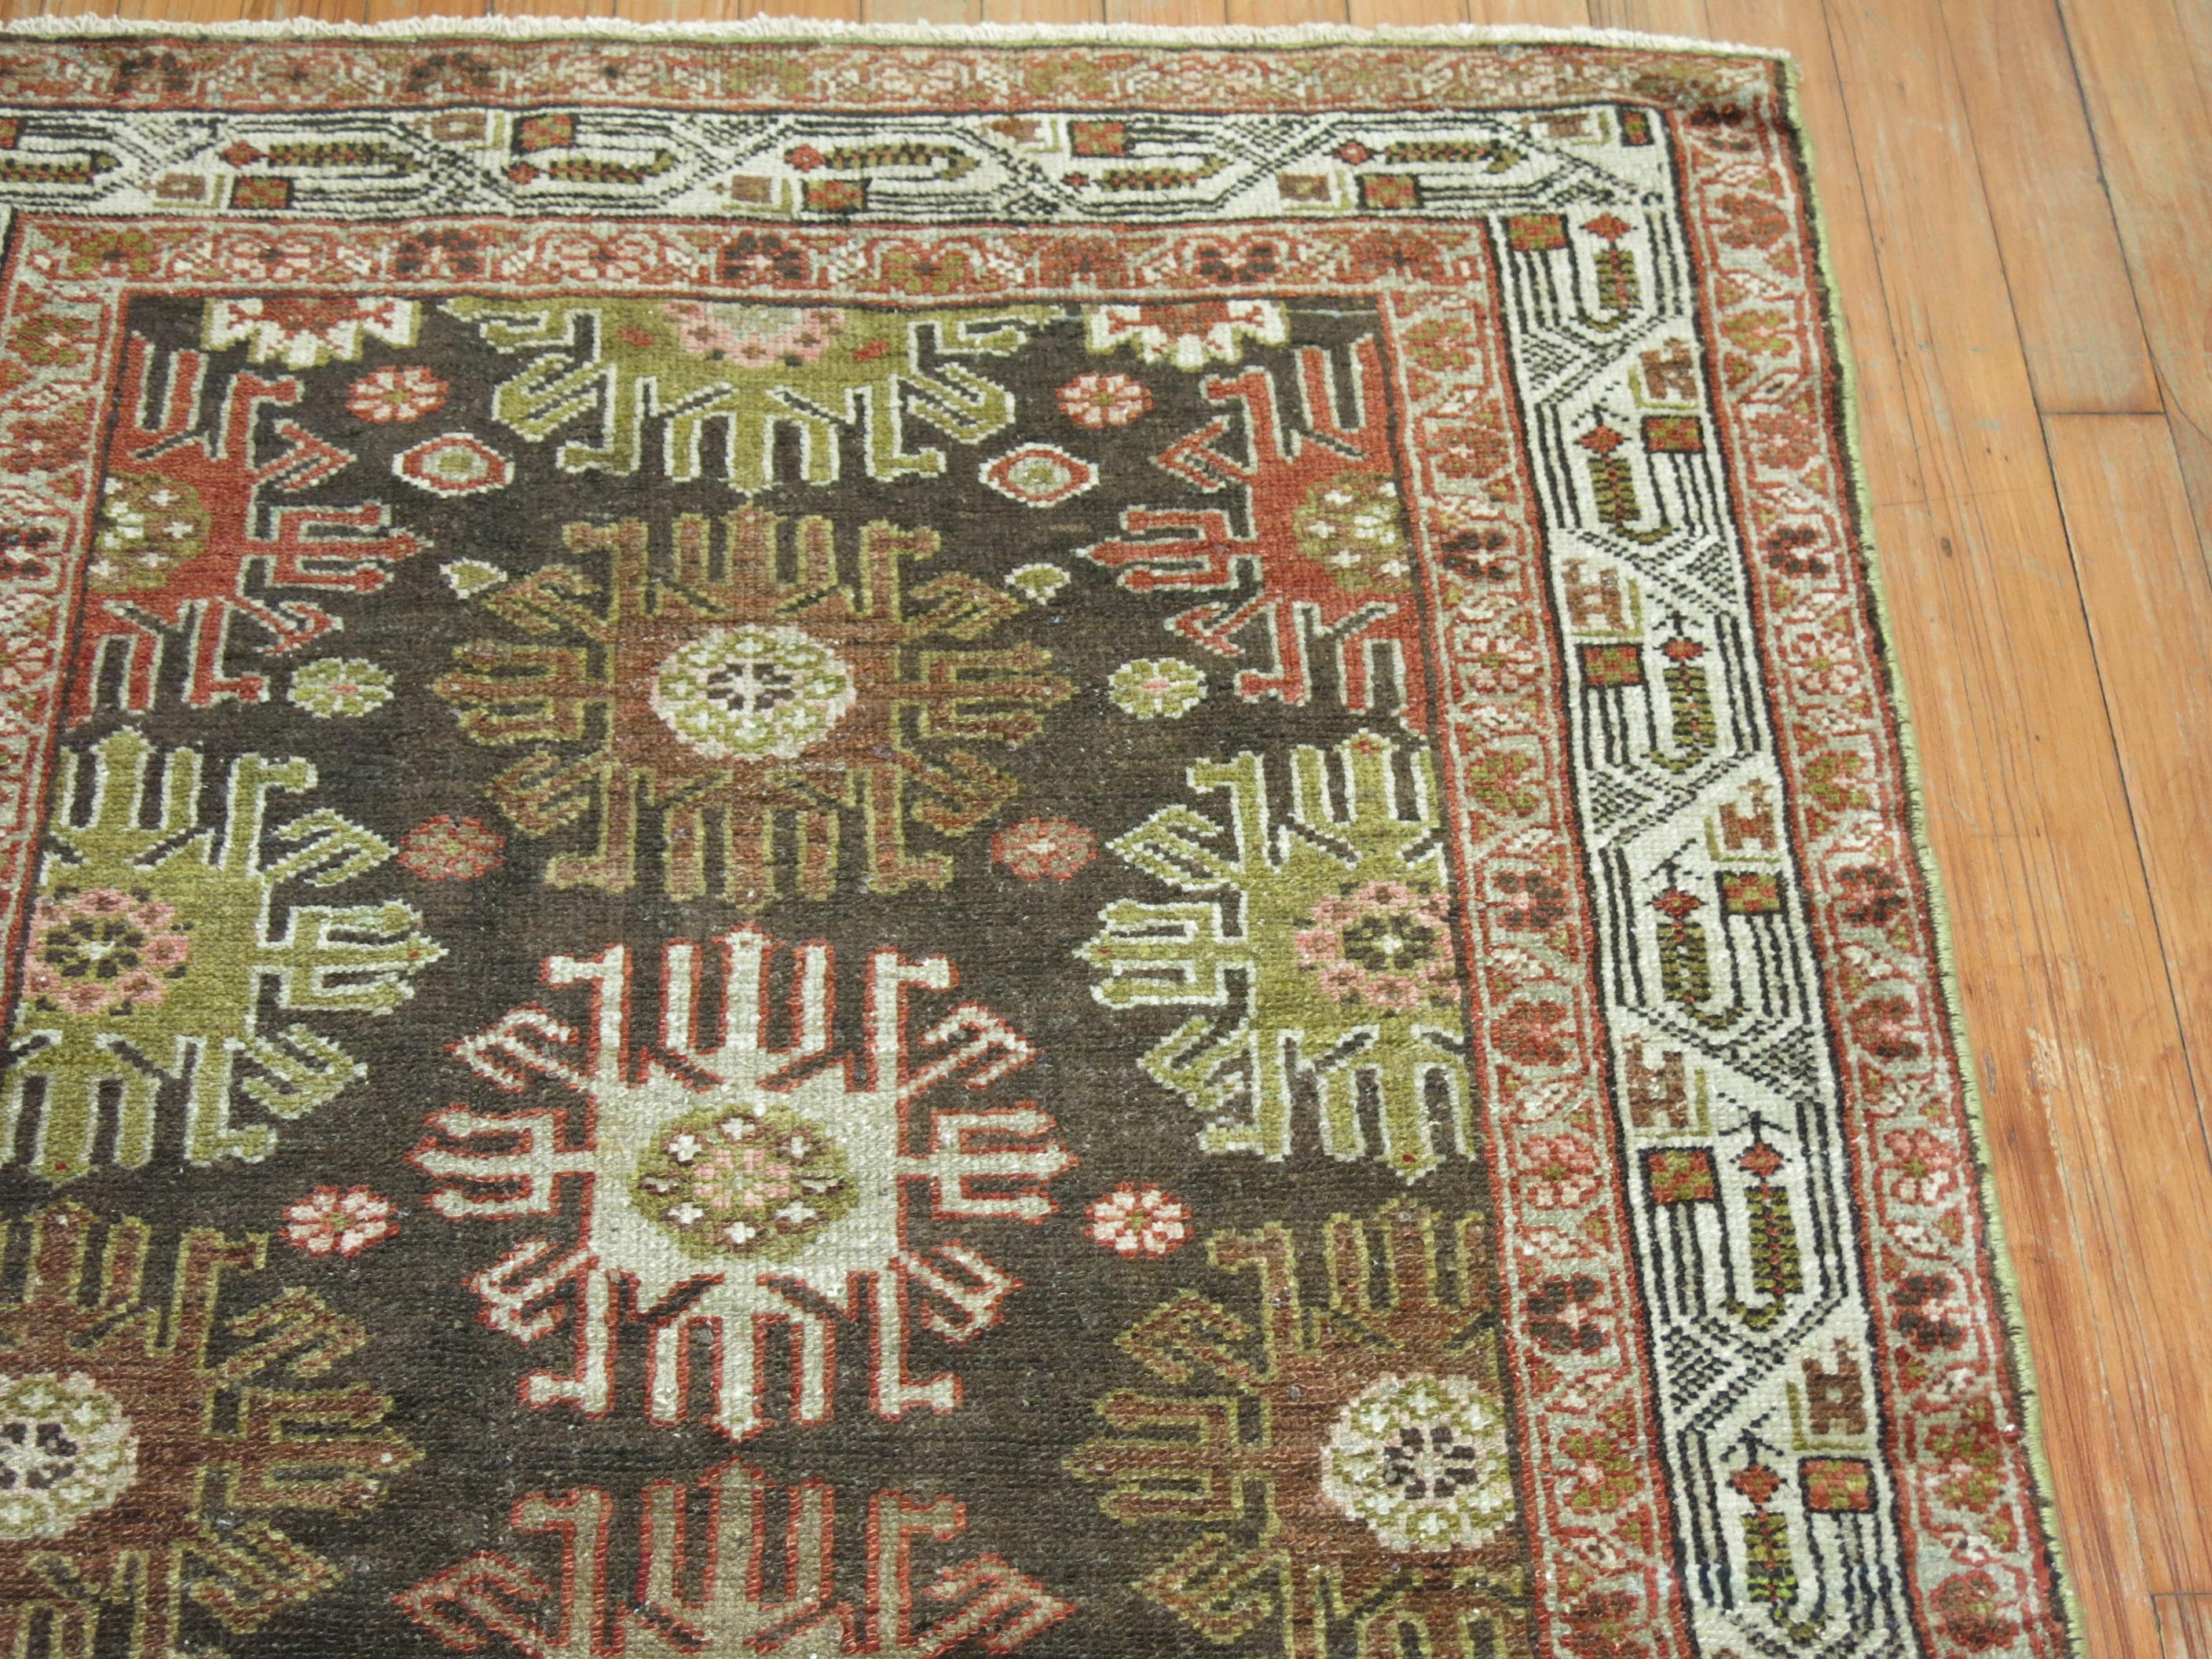 Early 20th century Persian Malayer rug. Predominantly in brown, charcoal, gray accents, circa 1920.

Measures: 3'3